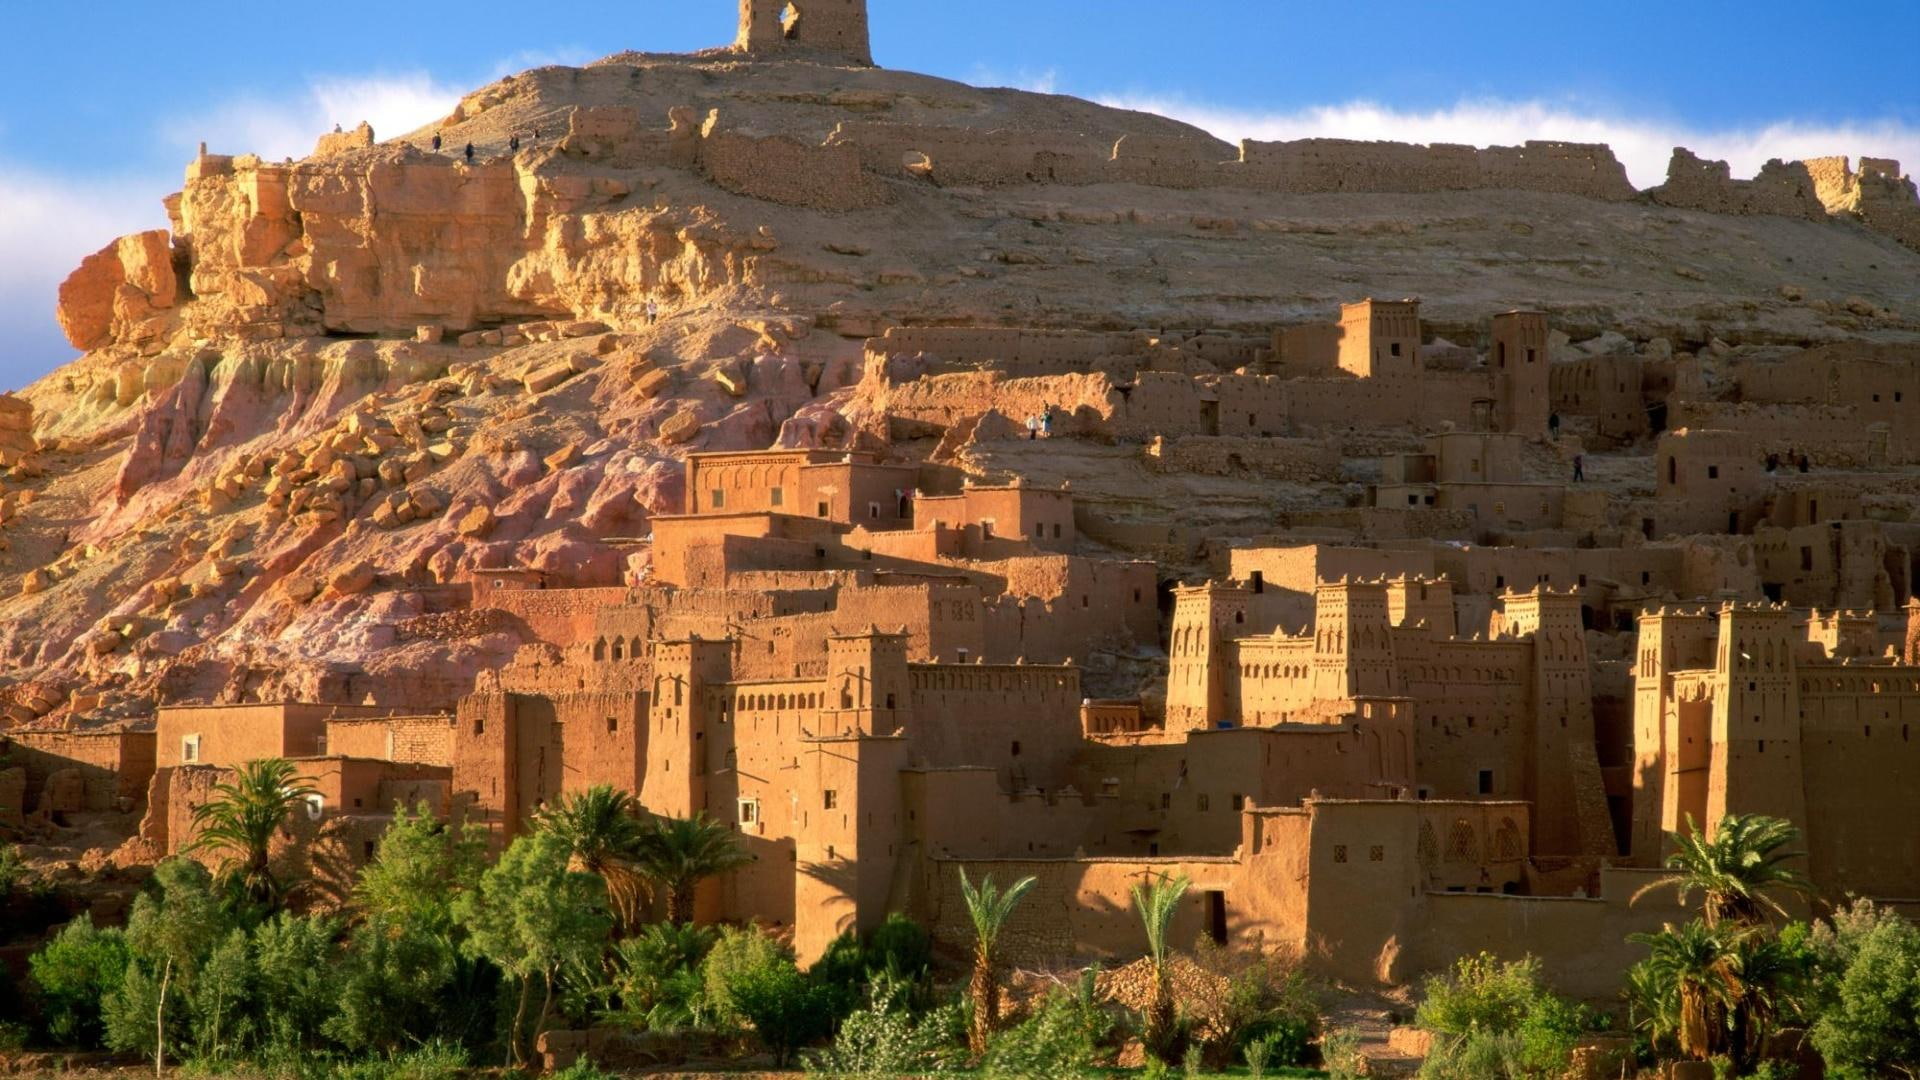 Kasbah Ruins Morocco, trees, cliff, houses, desert, ancient, nature and landscapes